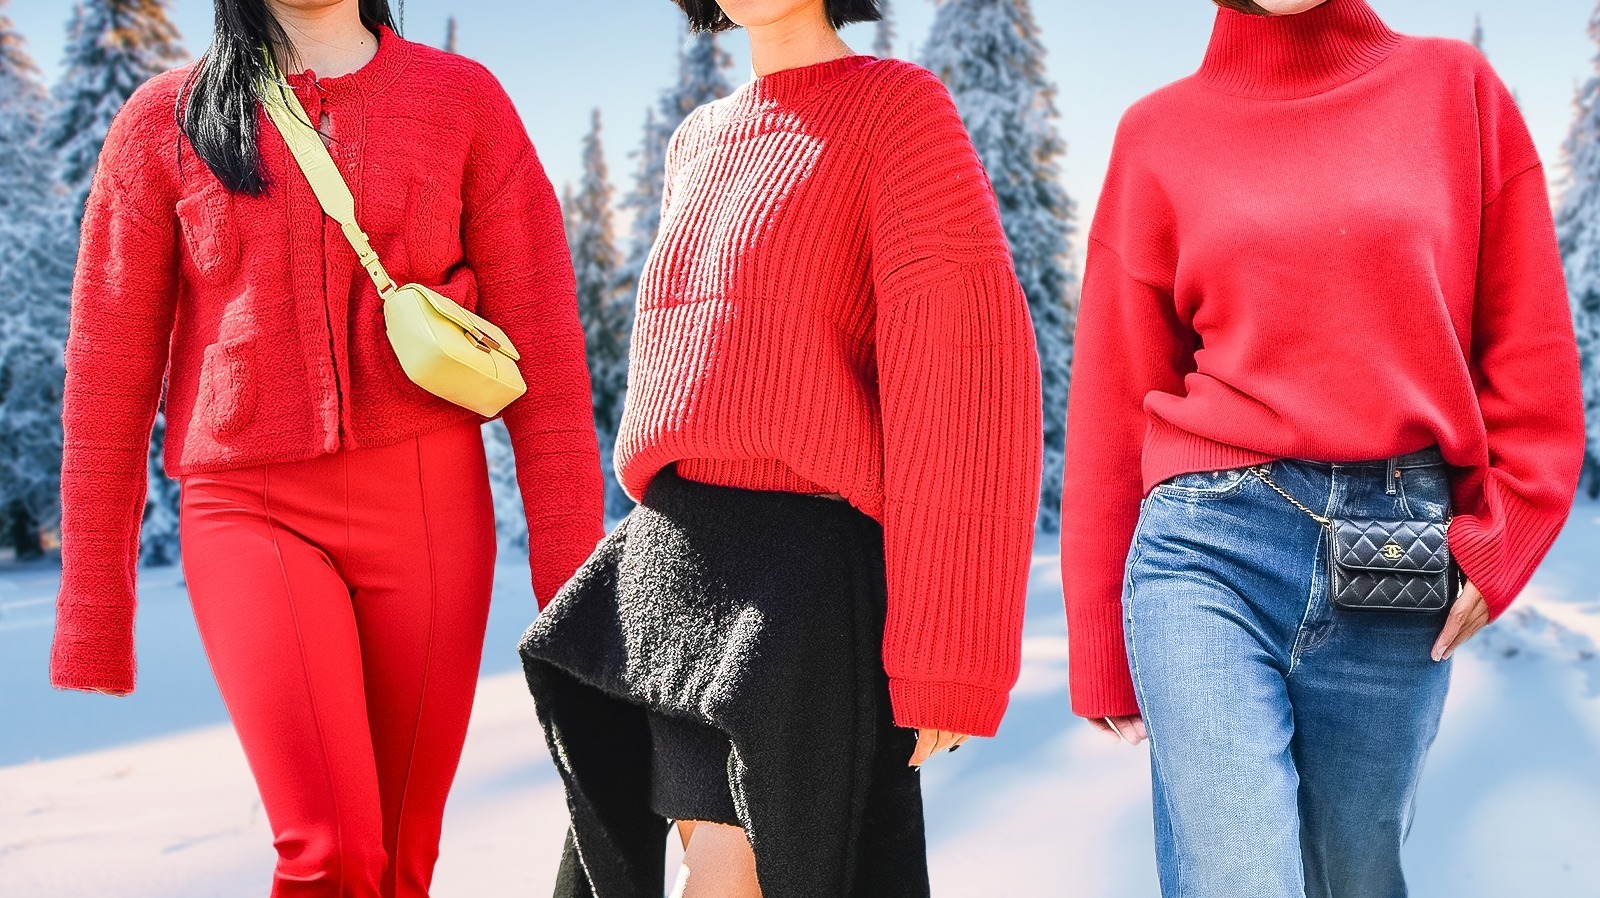 How to Wear a Red Sweater The Right Way